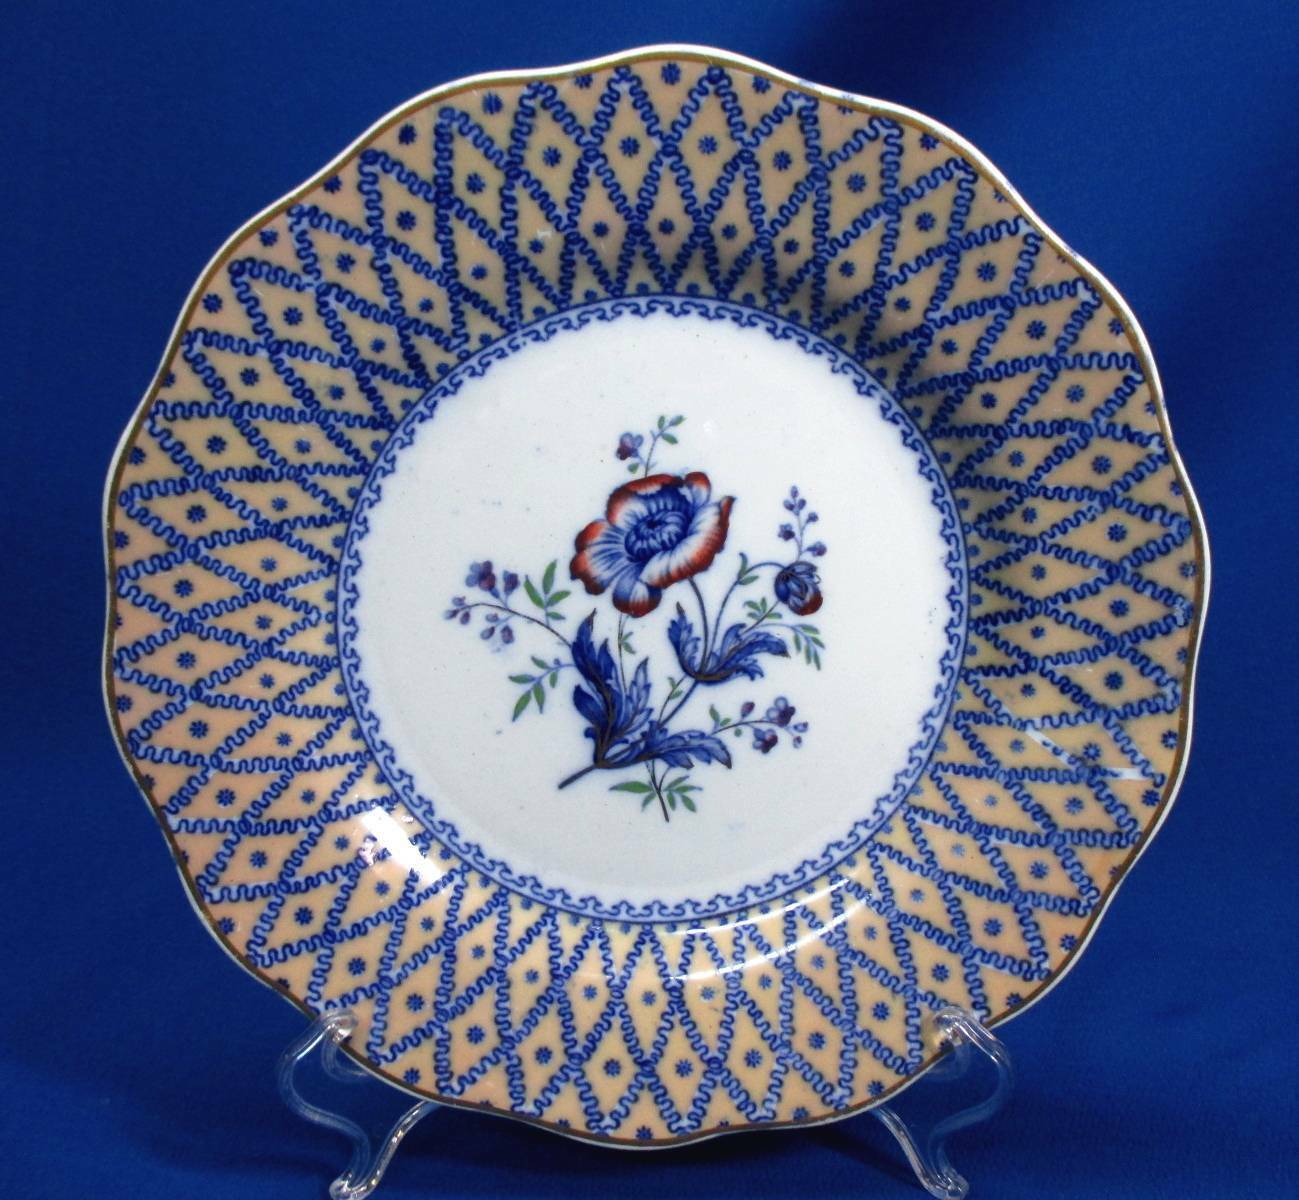 GORGEOUS 1840'S WEDGWOOD STAFFORDSHIRE FLORAL & GEOMETRIC CABINET PLATE